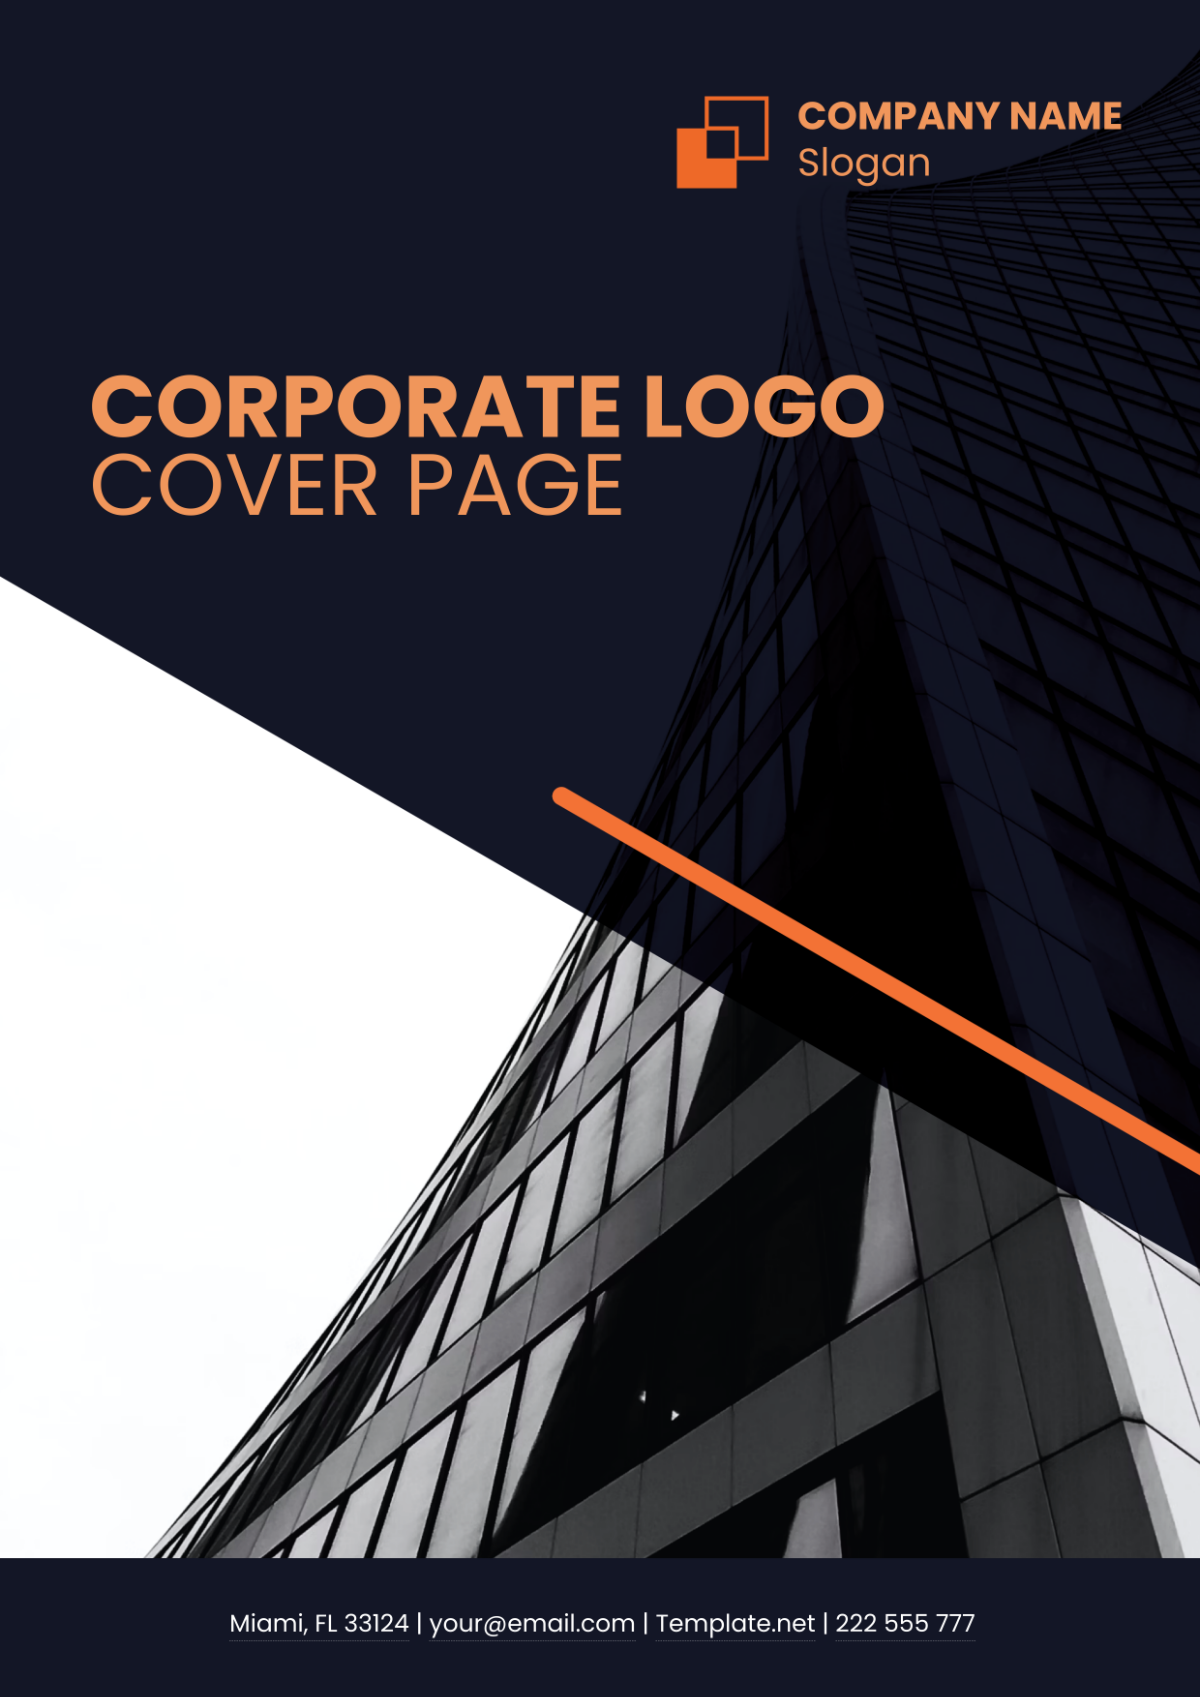 Free Corporate Logo Cover Page Template